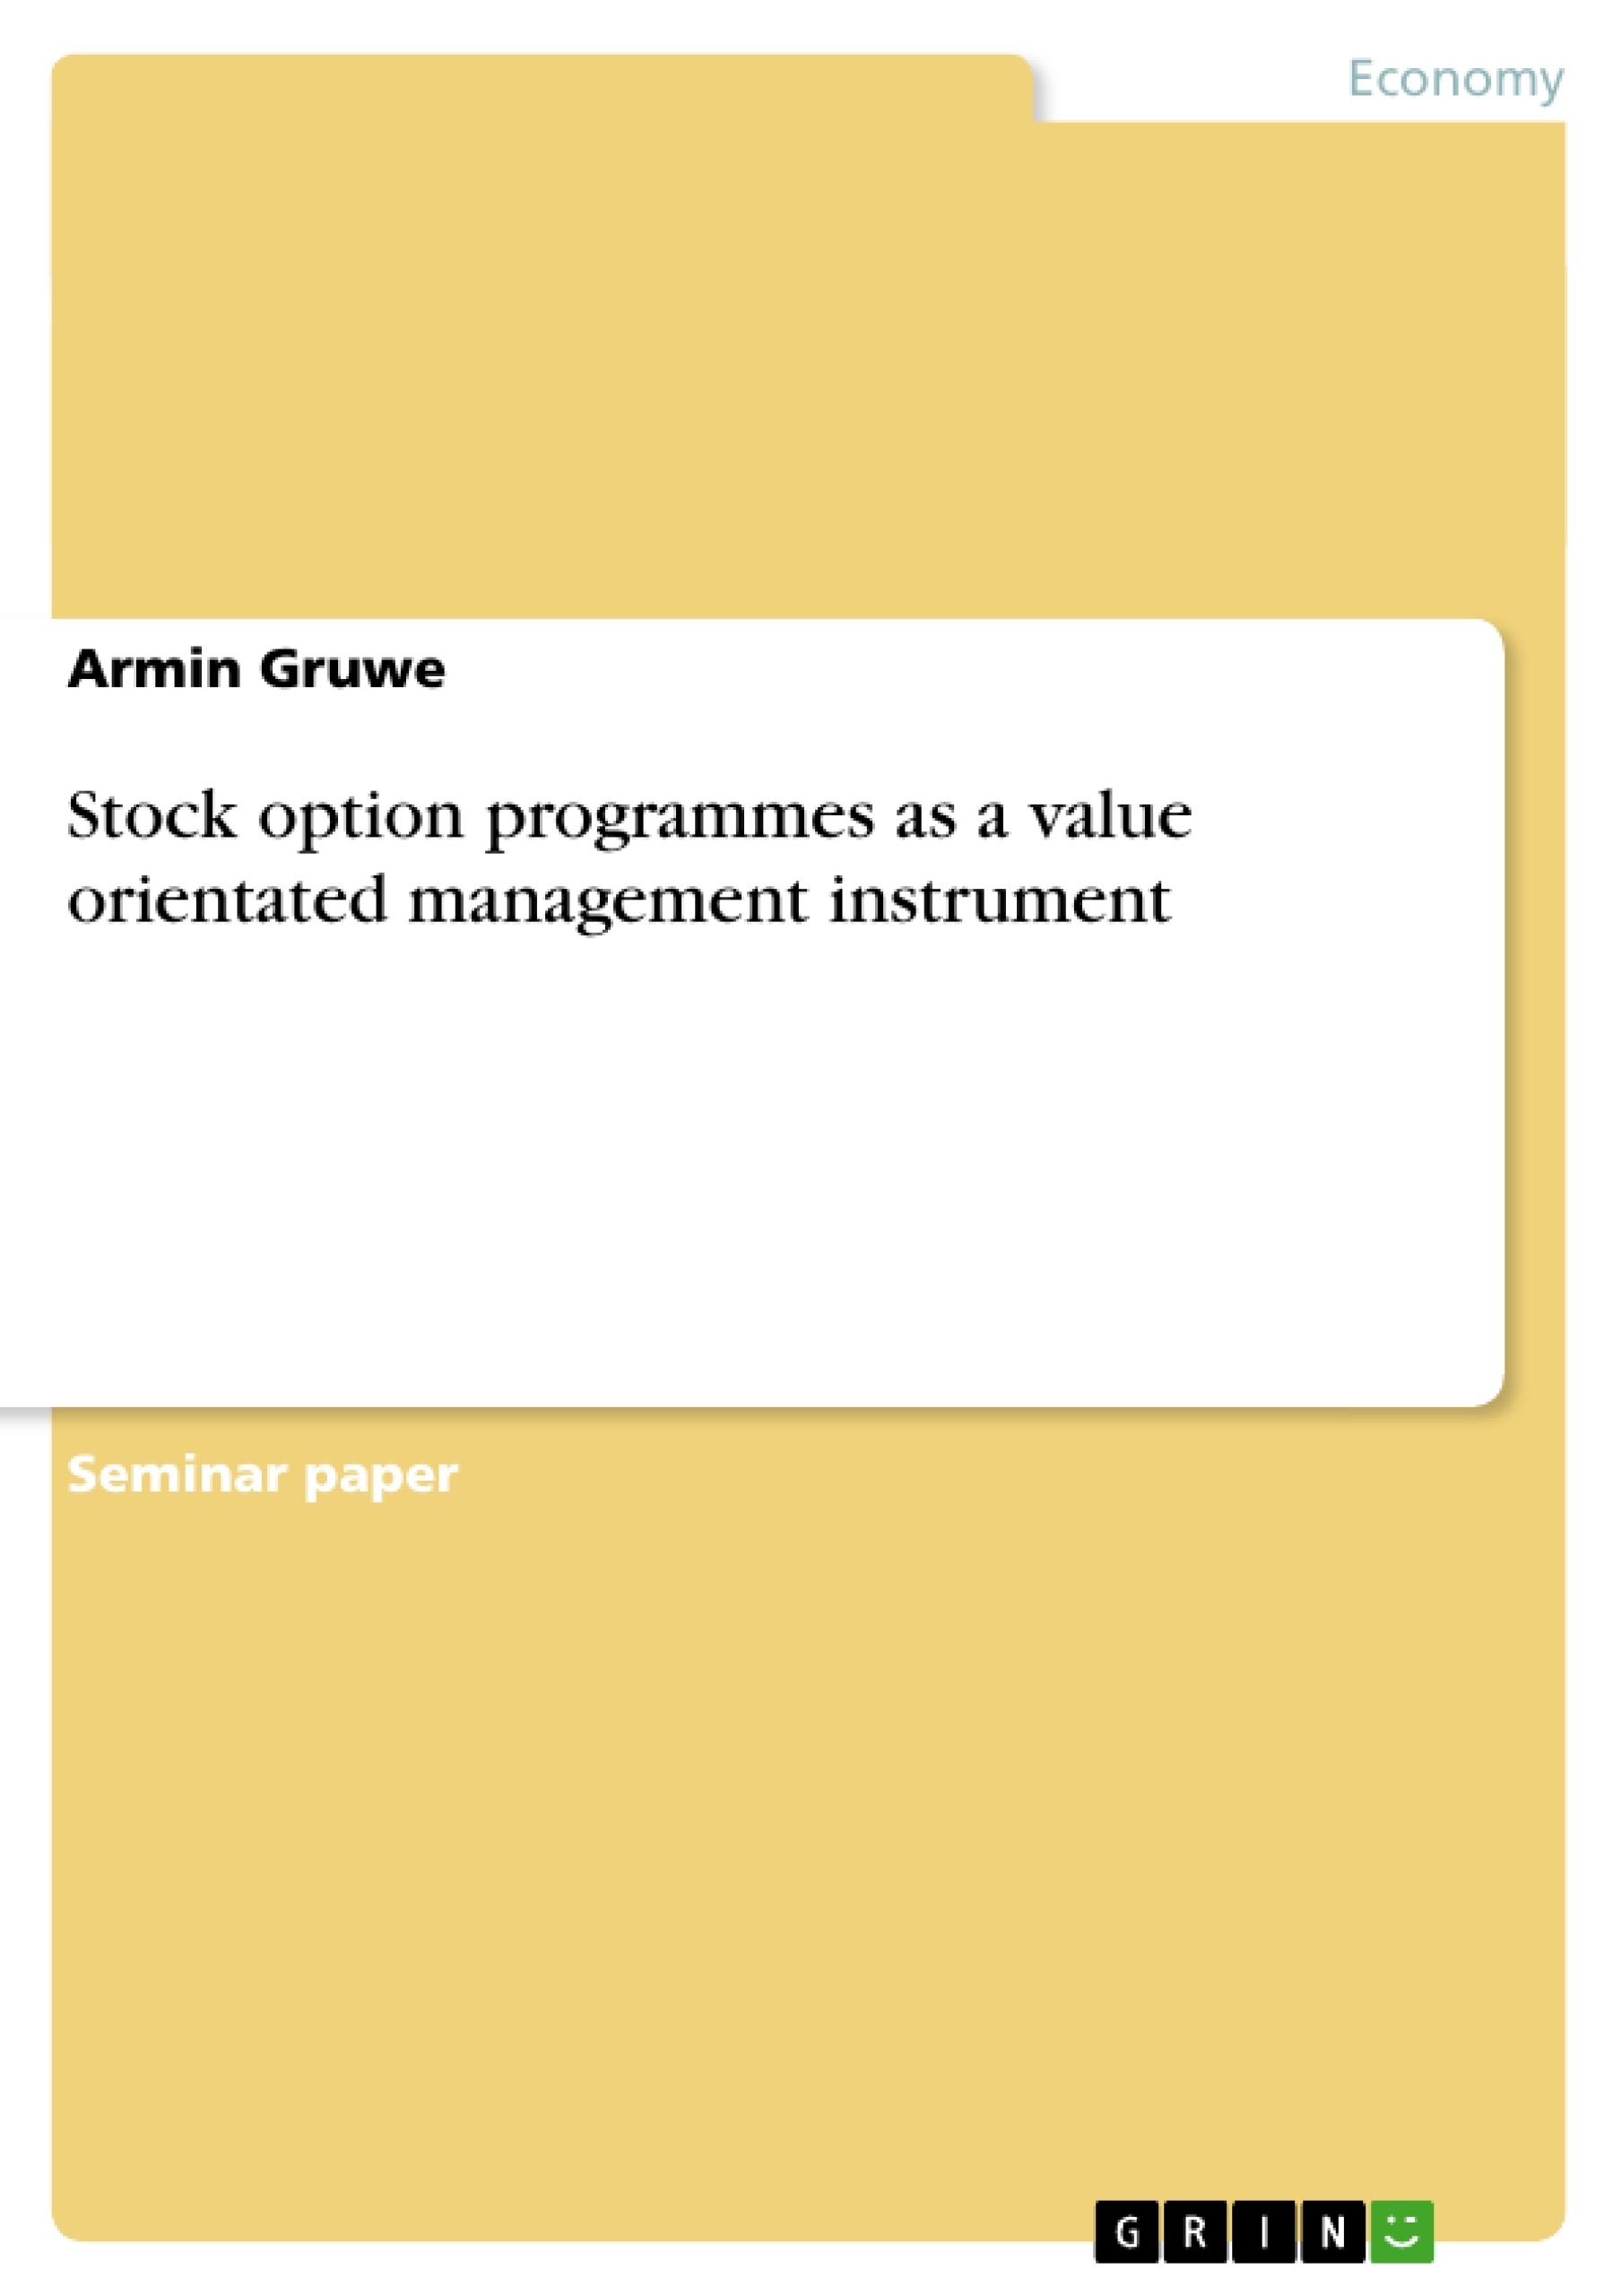 Title: Stock option programmes as a value orientated management instrument